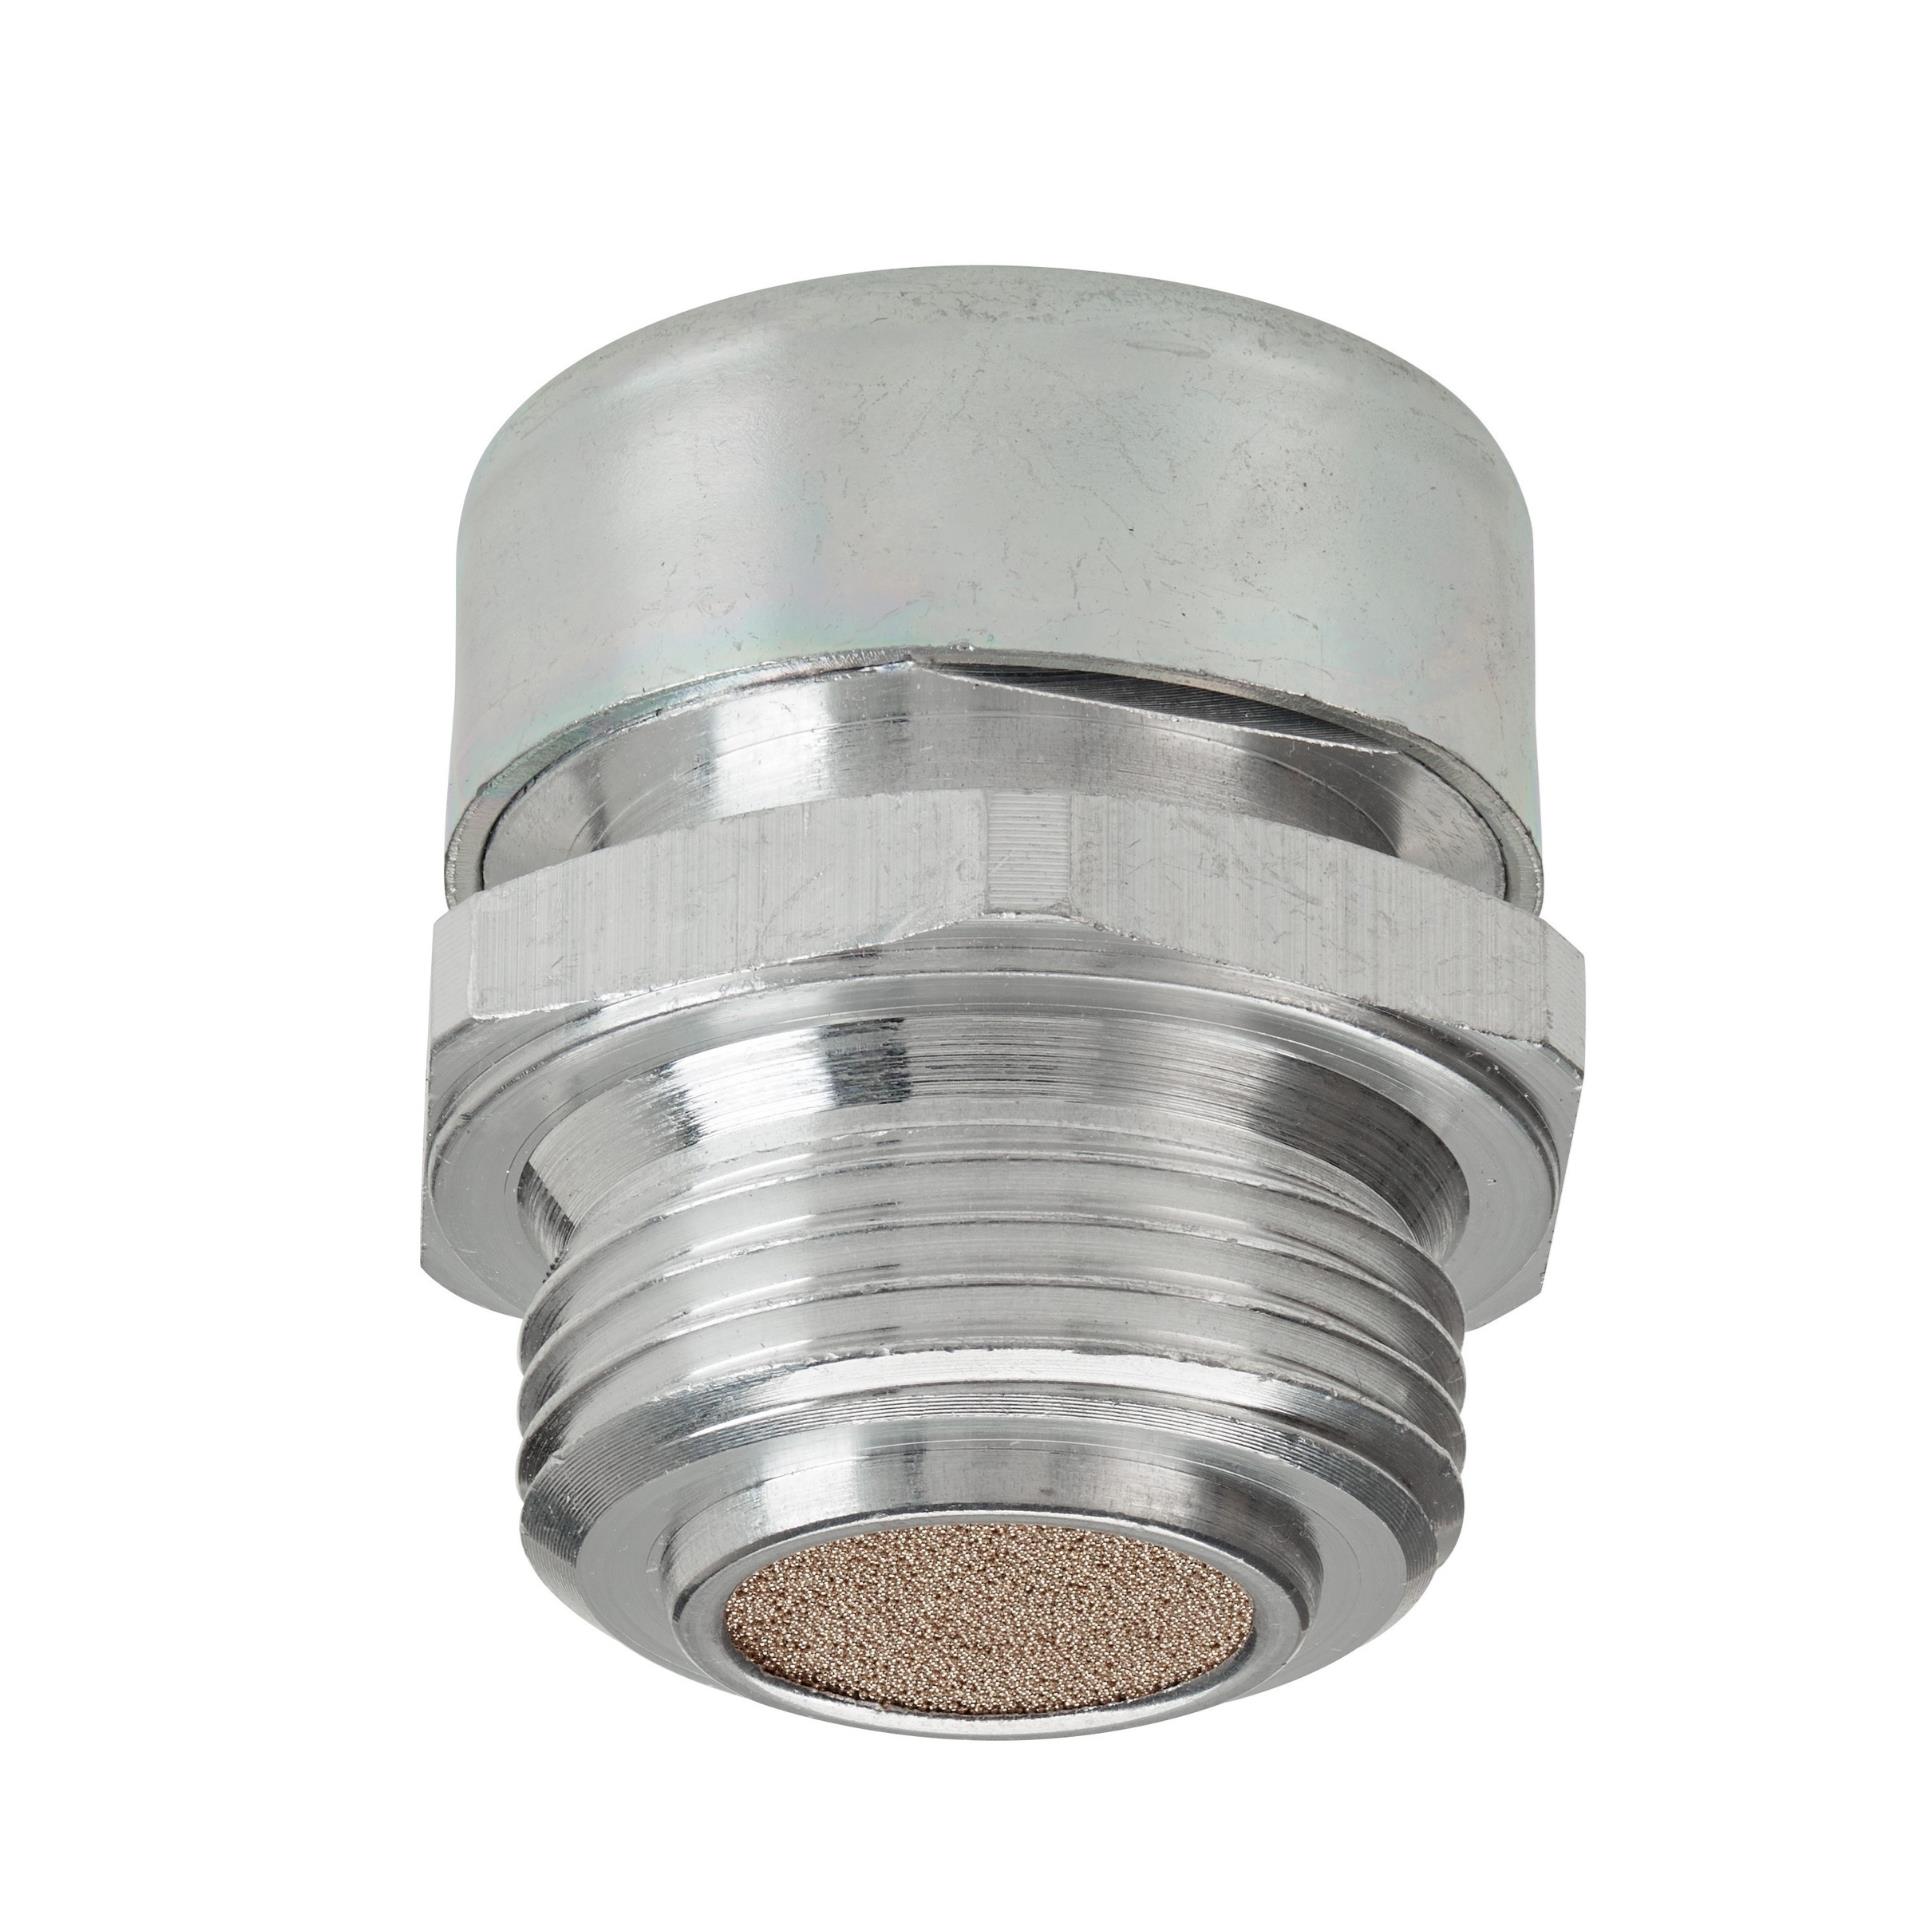 Hydraulic oil filling plug with breather, 1" BSP, TSF5G